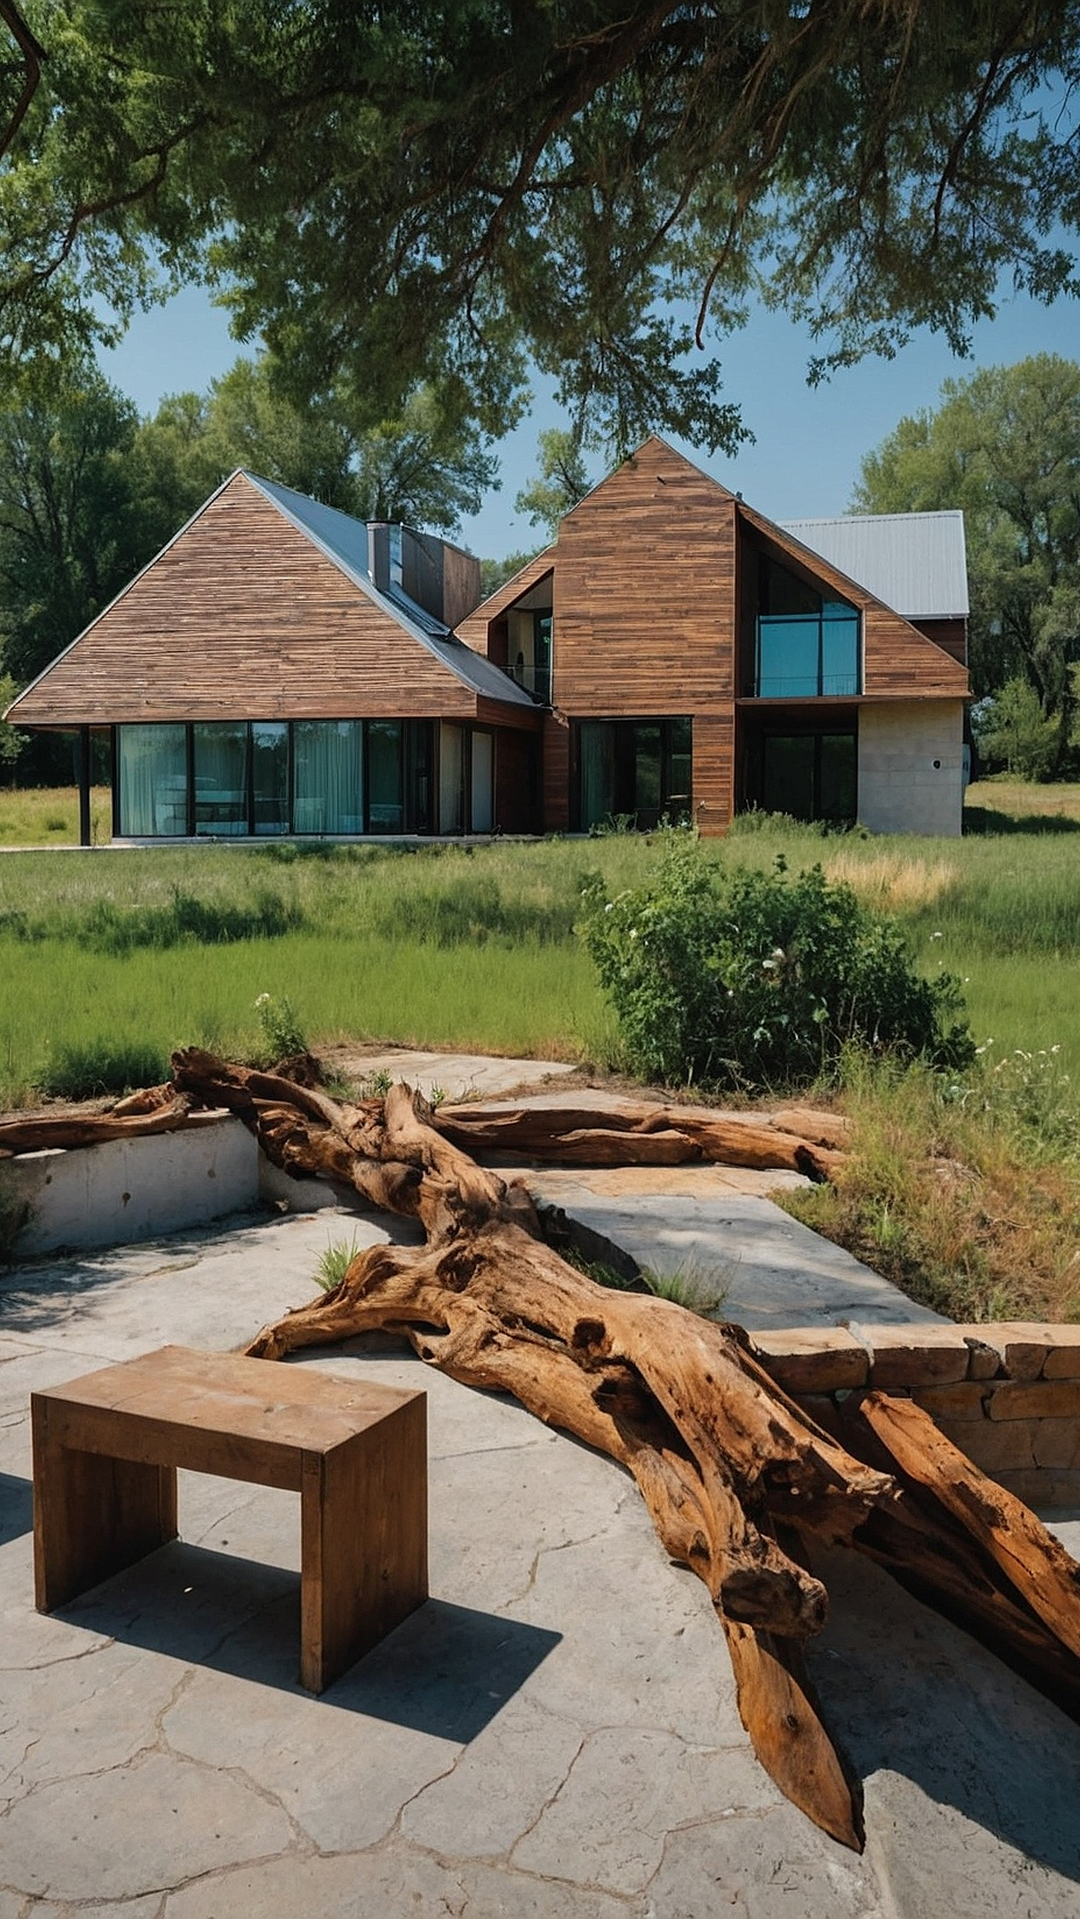 Contemporary Countryside Living: Architectural Inspiration